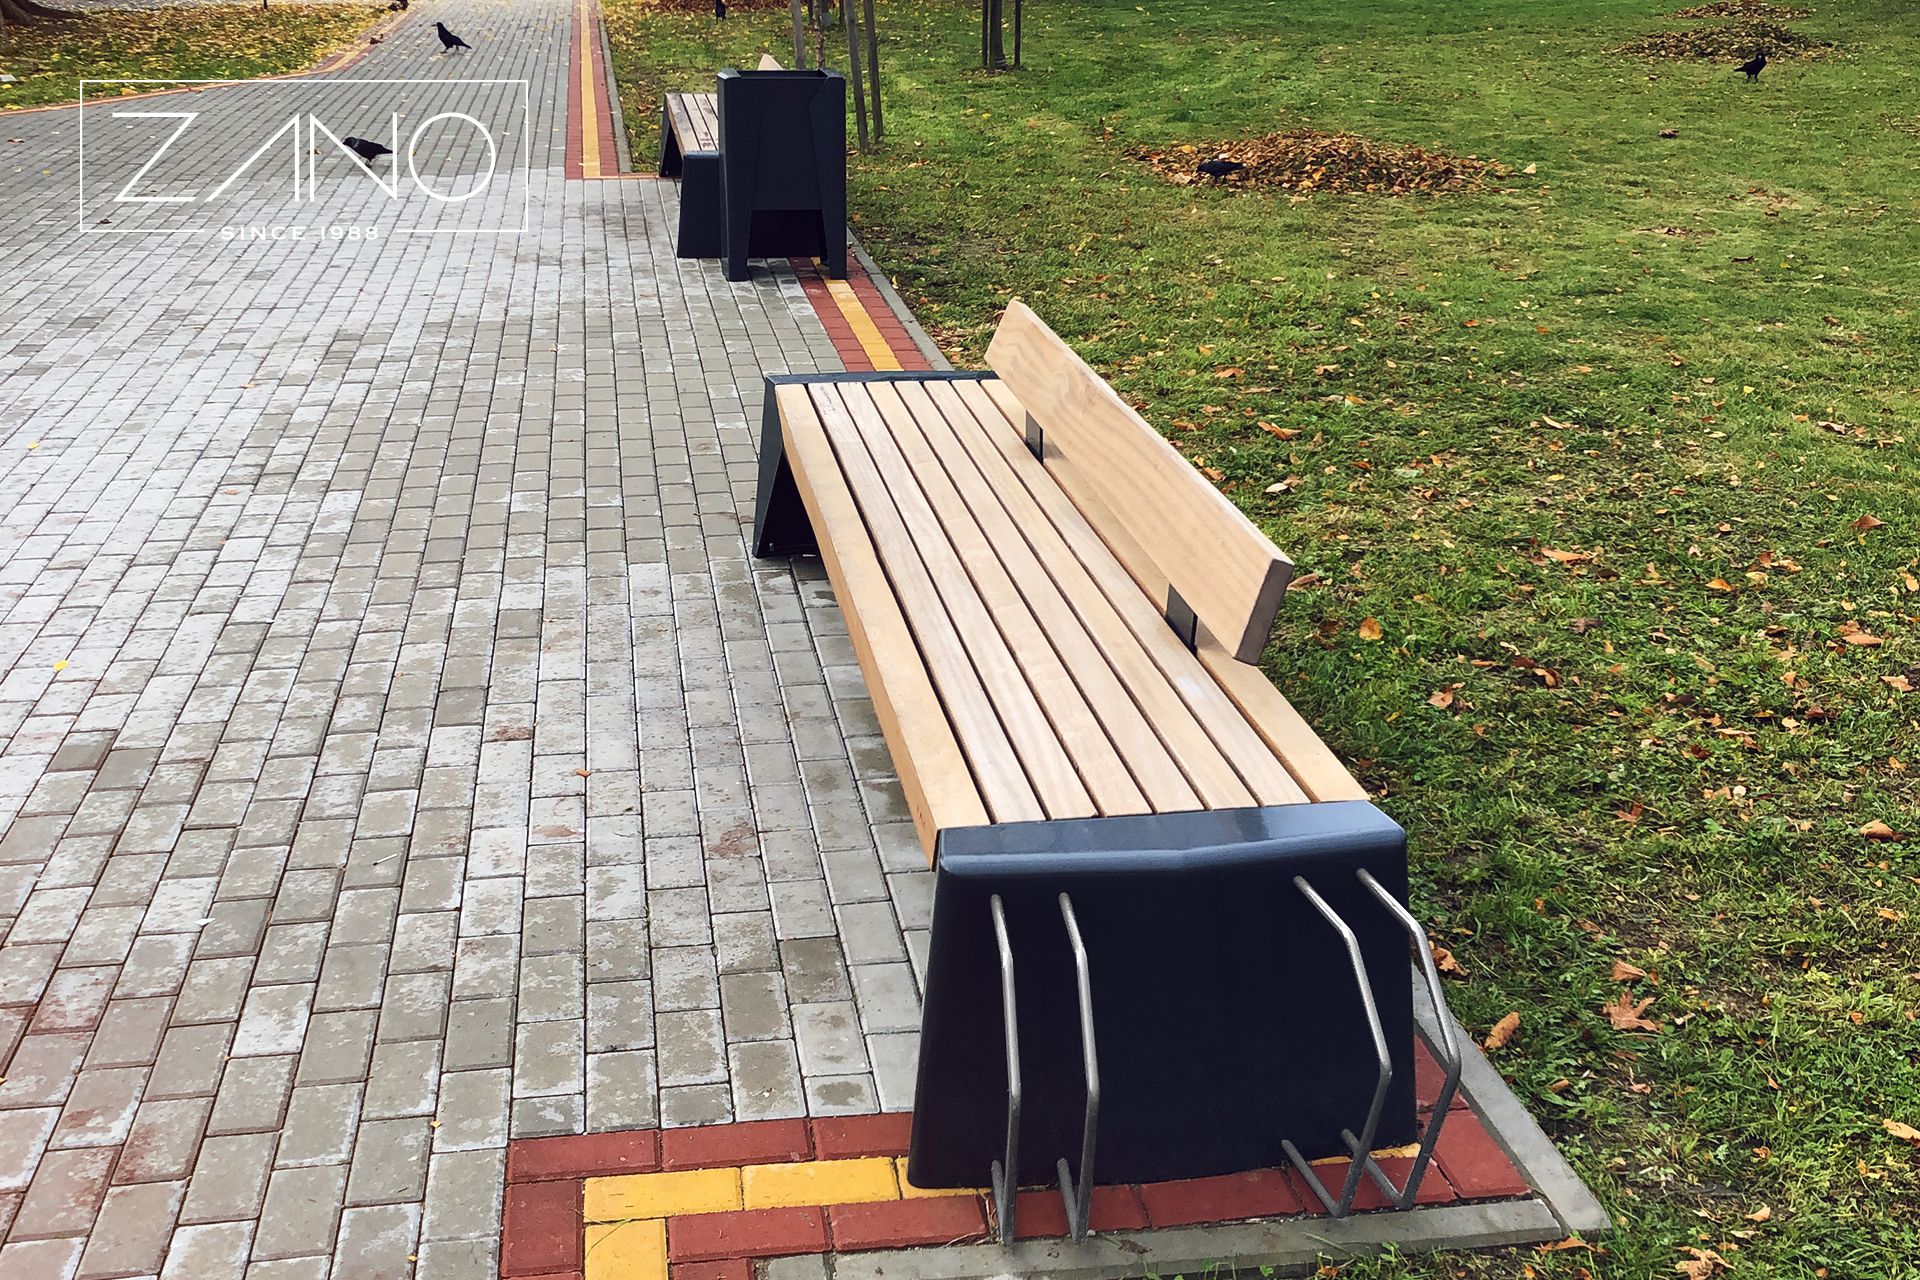 Photon city bench - standard with bicycle stand